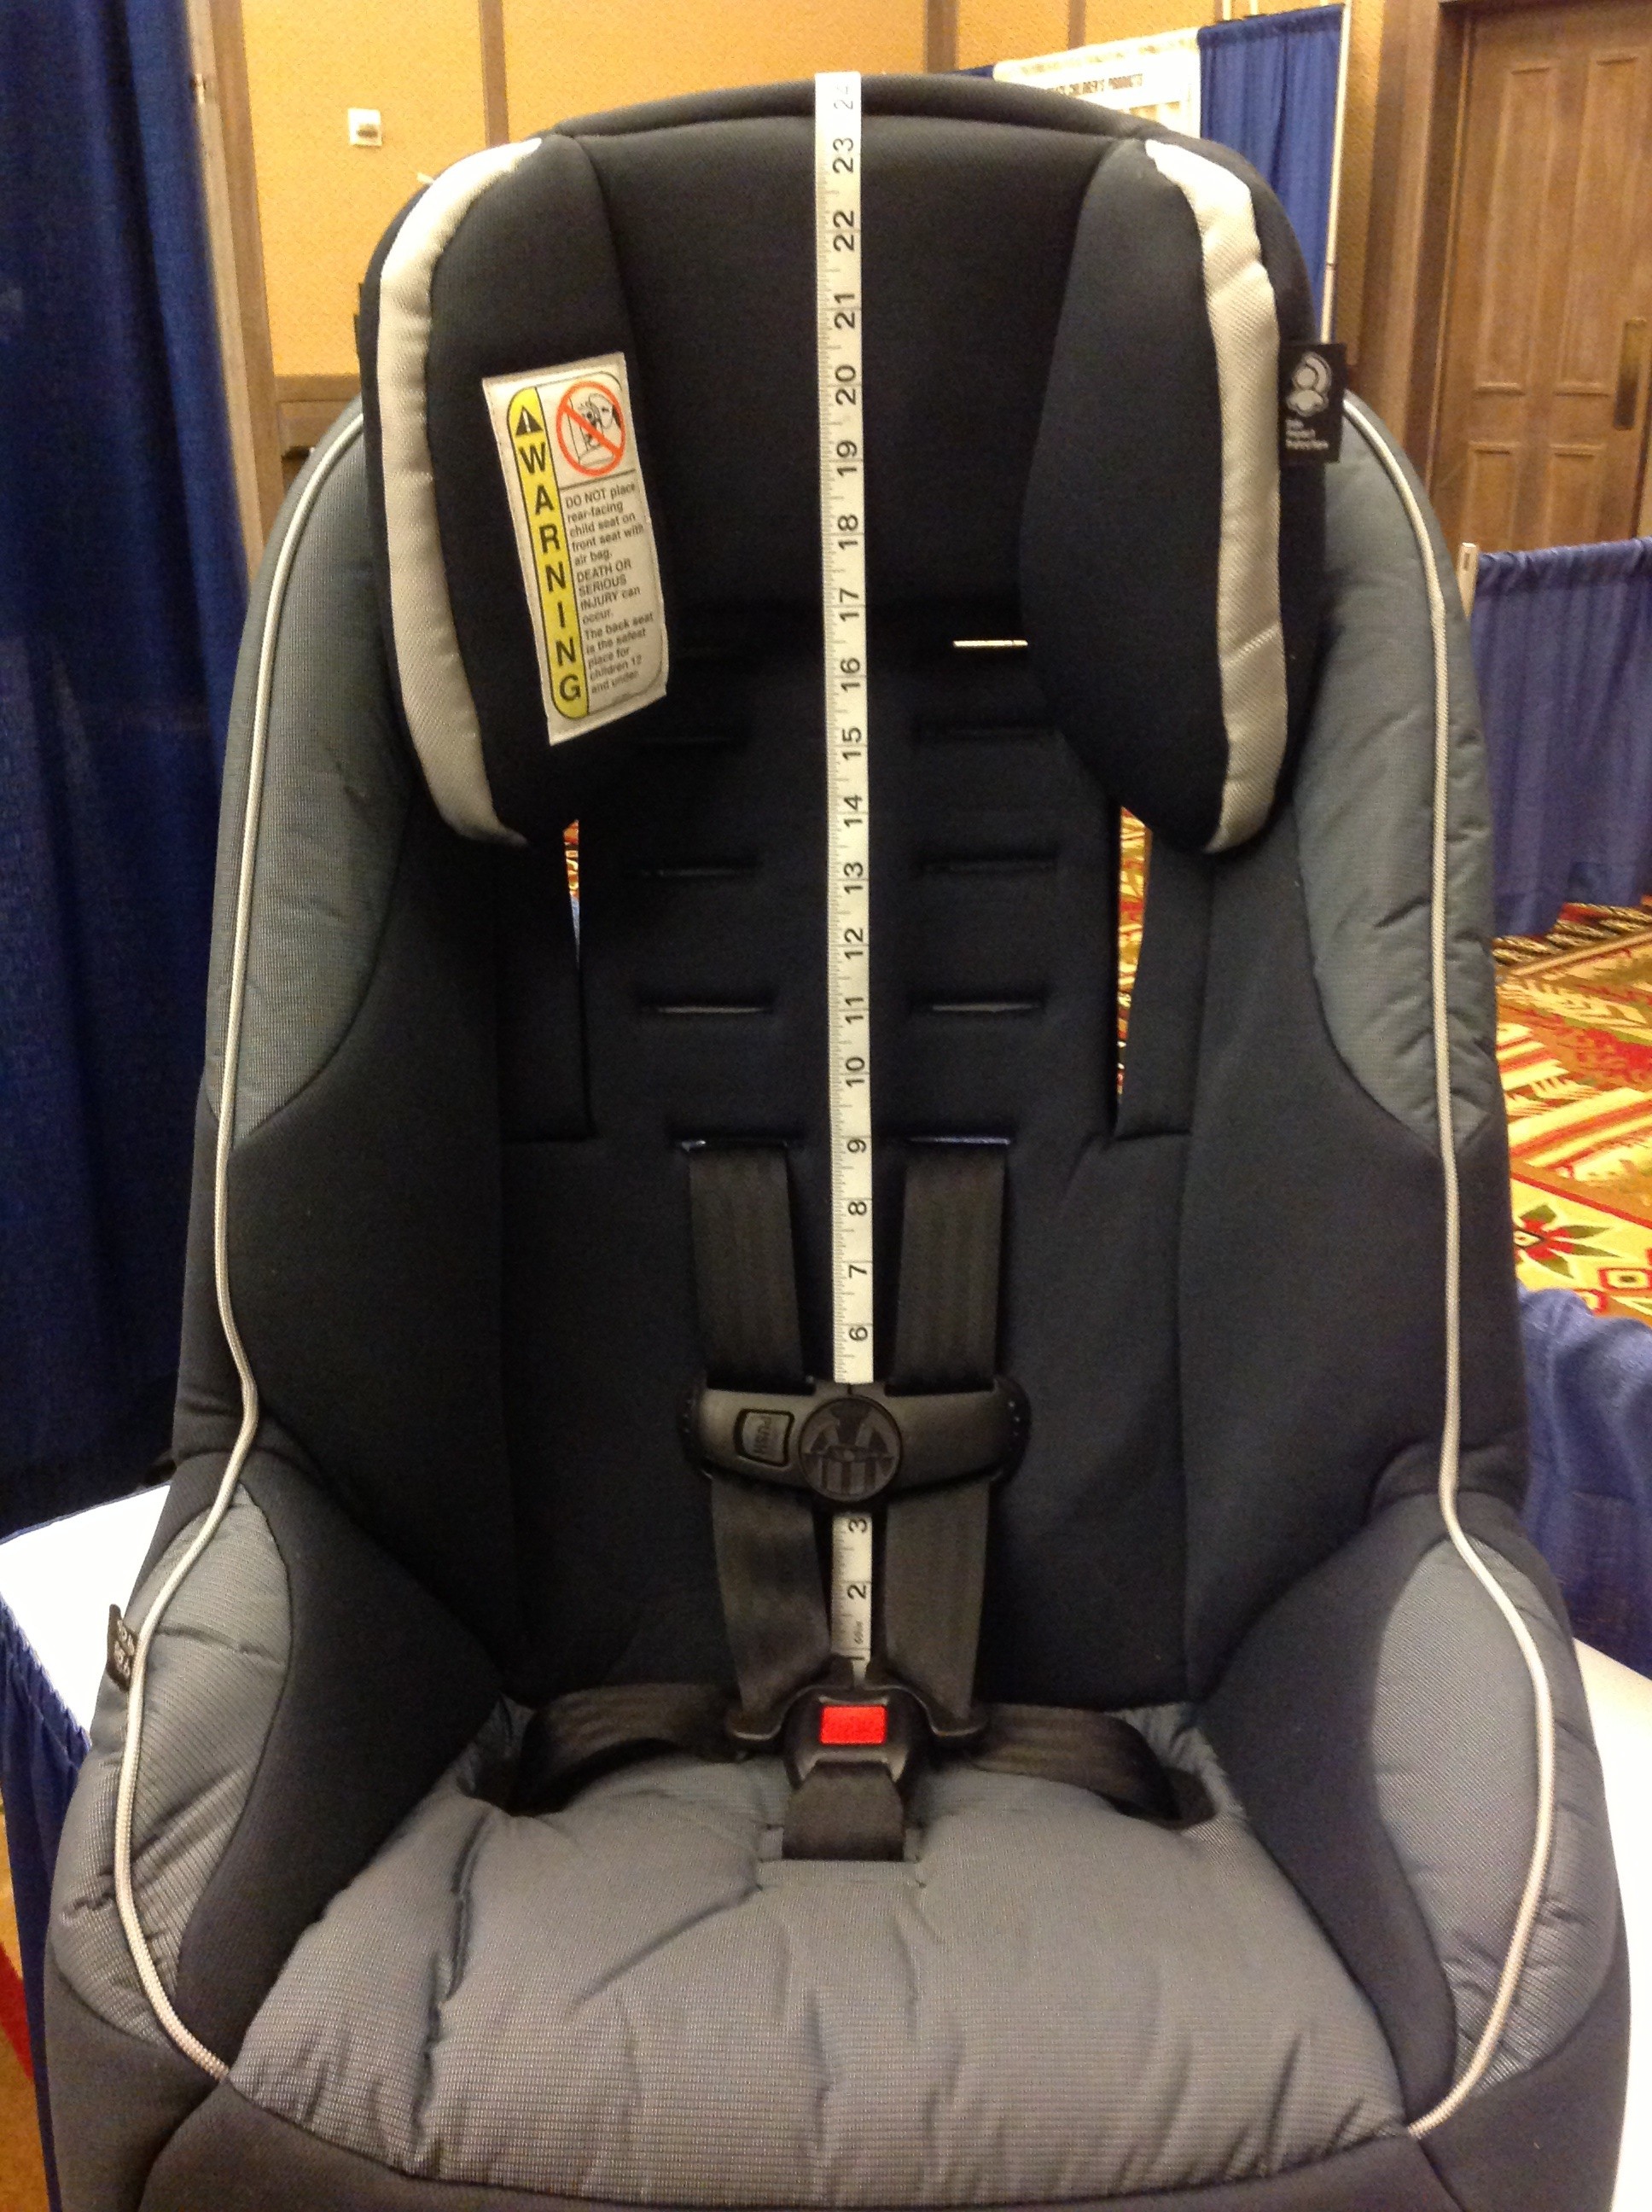 Rear Facing Convertible Seats Measurements Height Limits Weight Catblog - What Is The Height And Weight Limit For Infant Car Seat